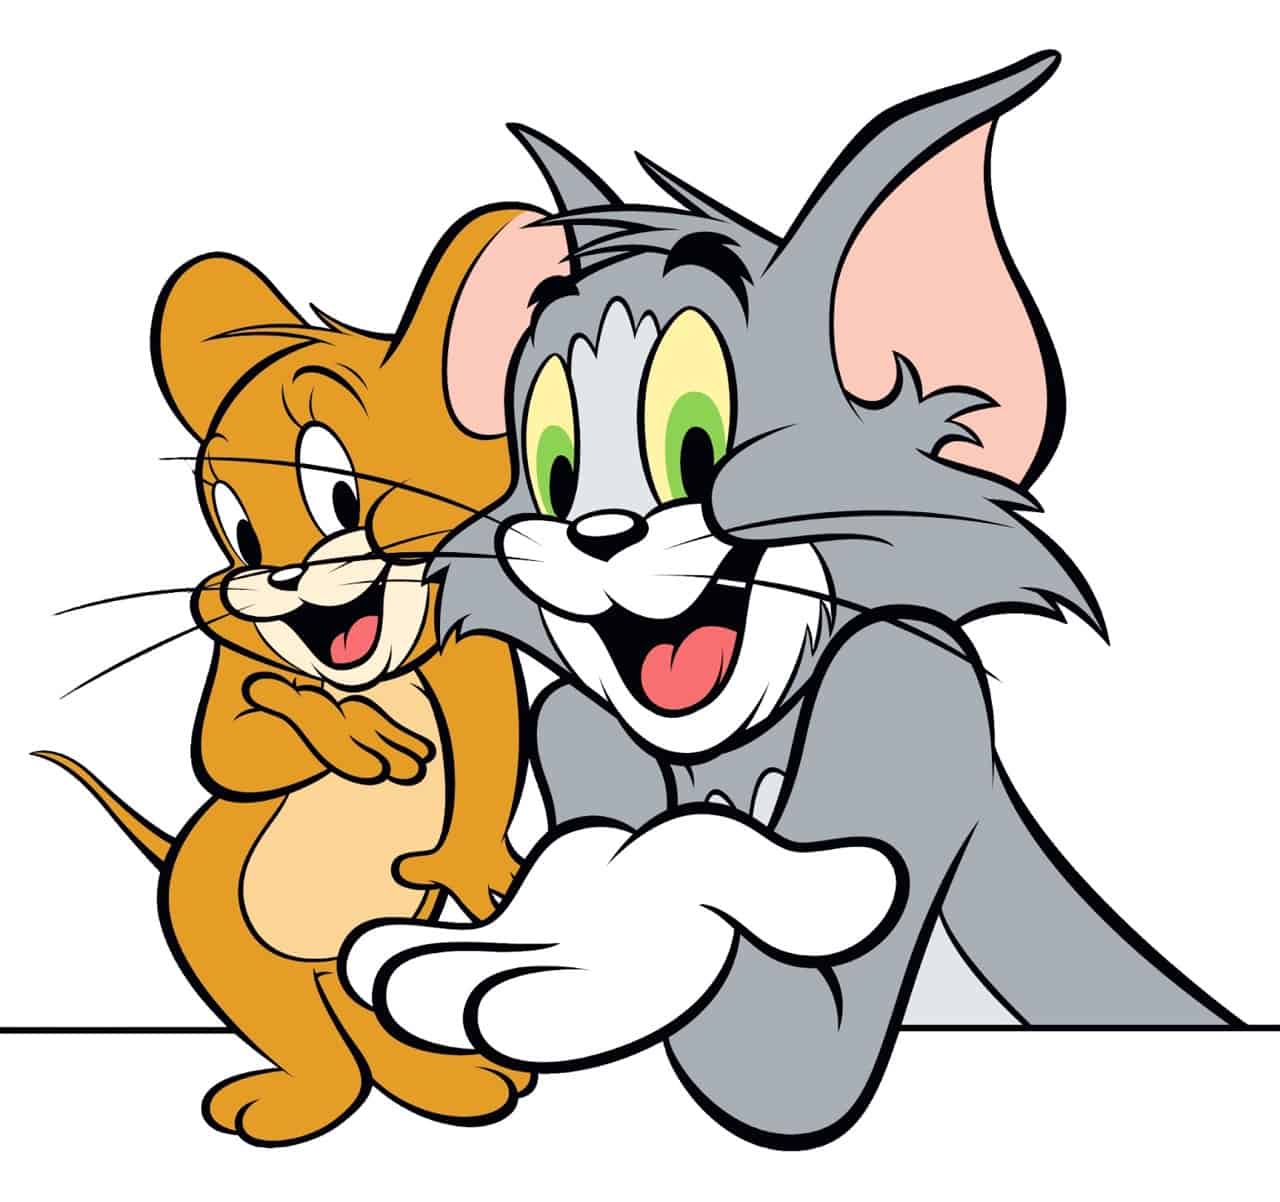 Tom and Jerry DP for Instagram